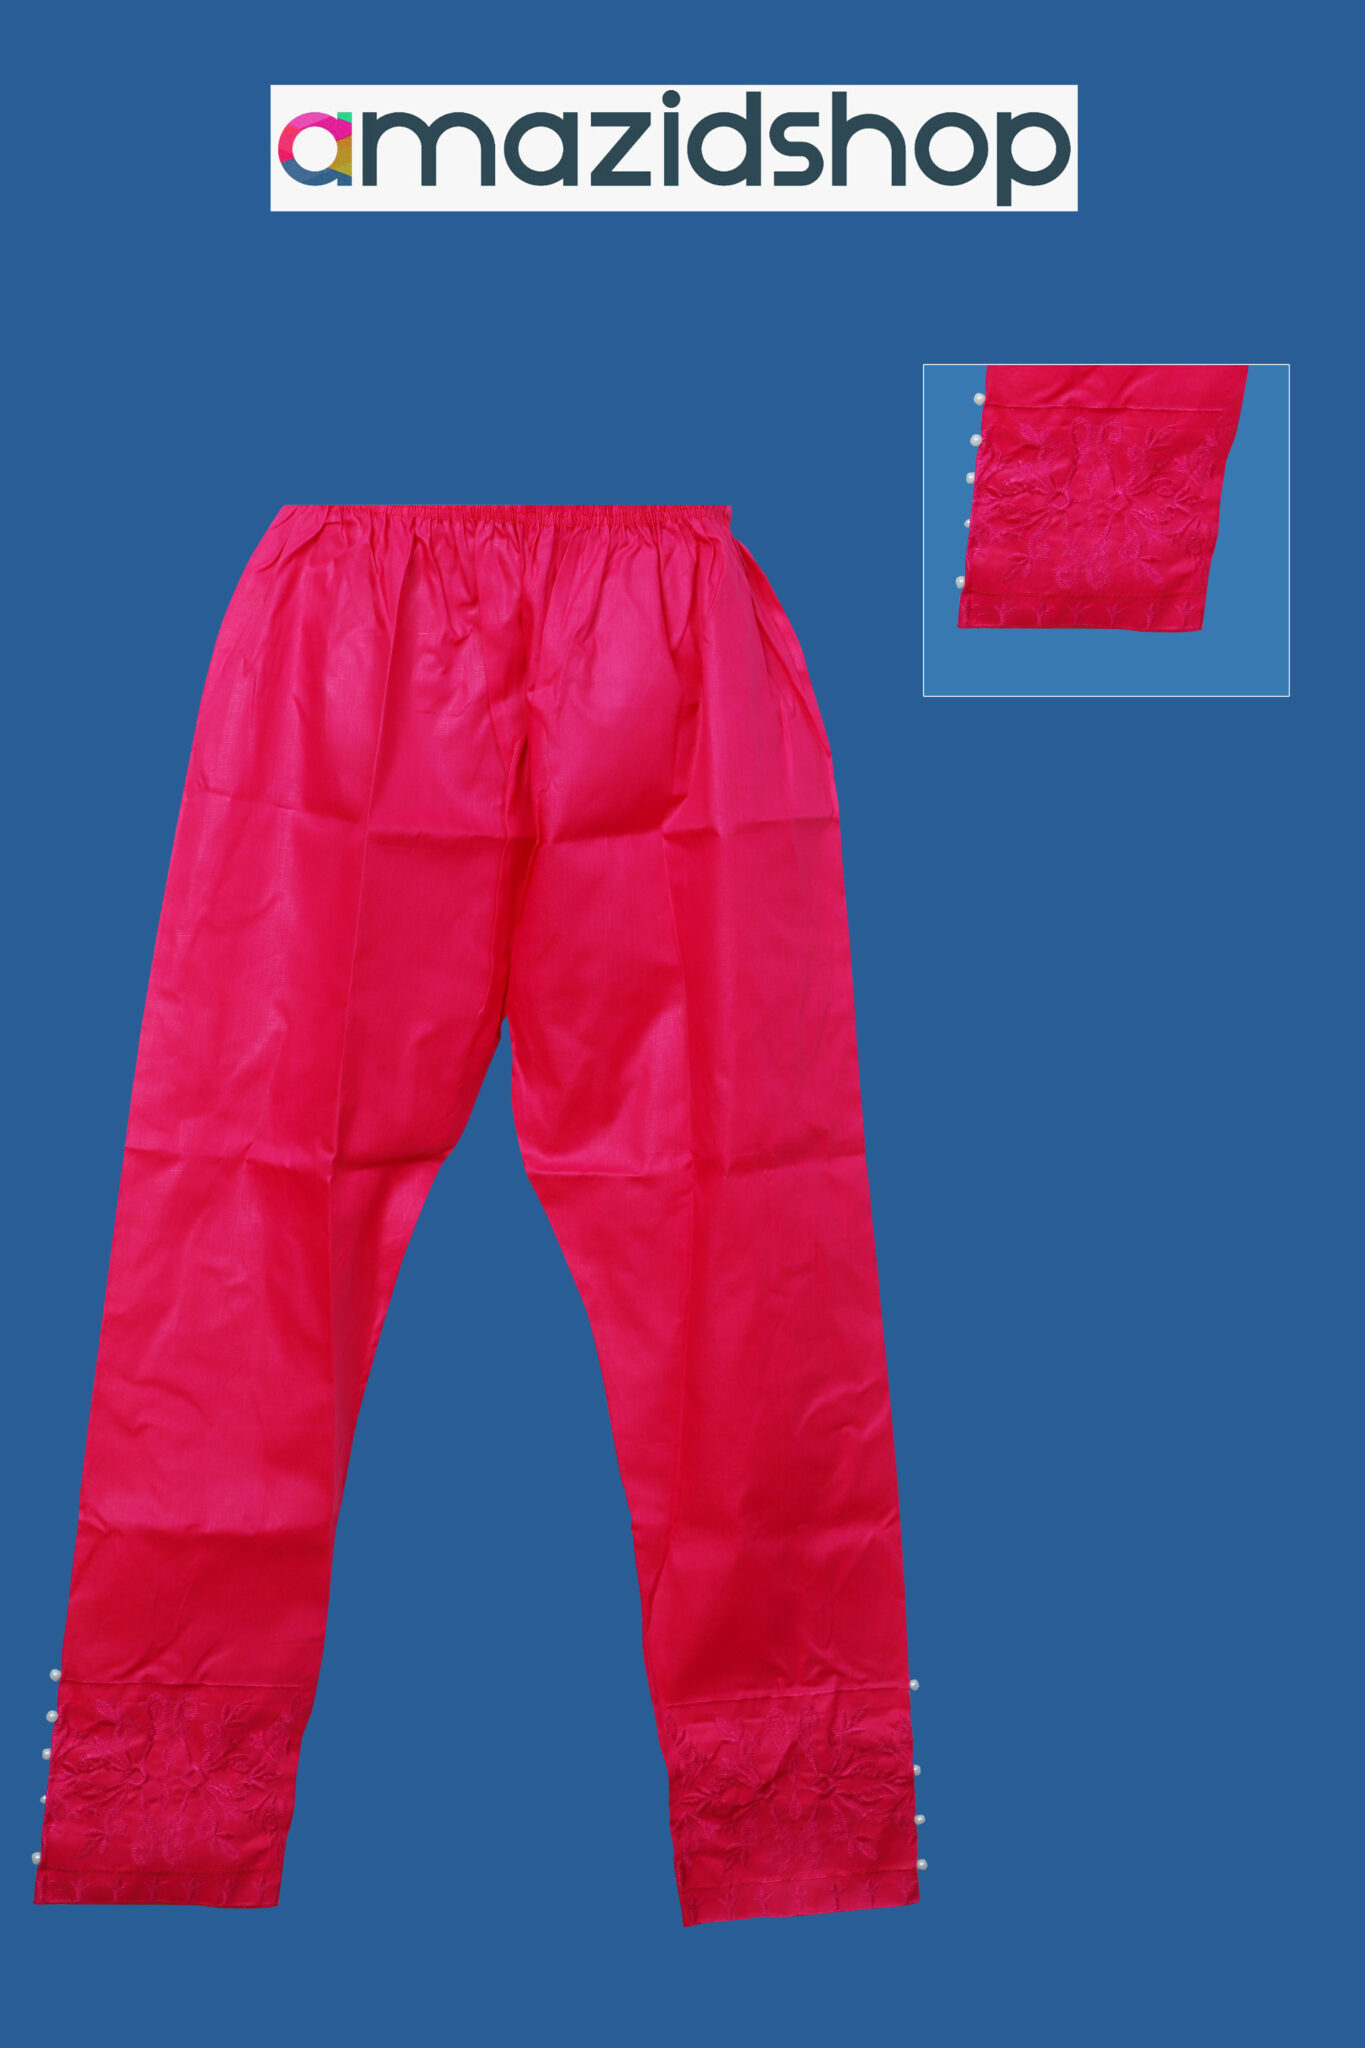 Cotton Standard 1 Piece Trouser Stitched Pants for Girls Women pink